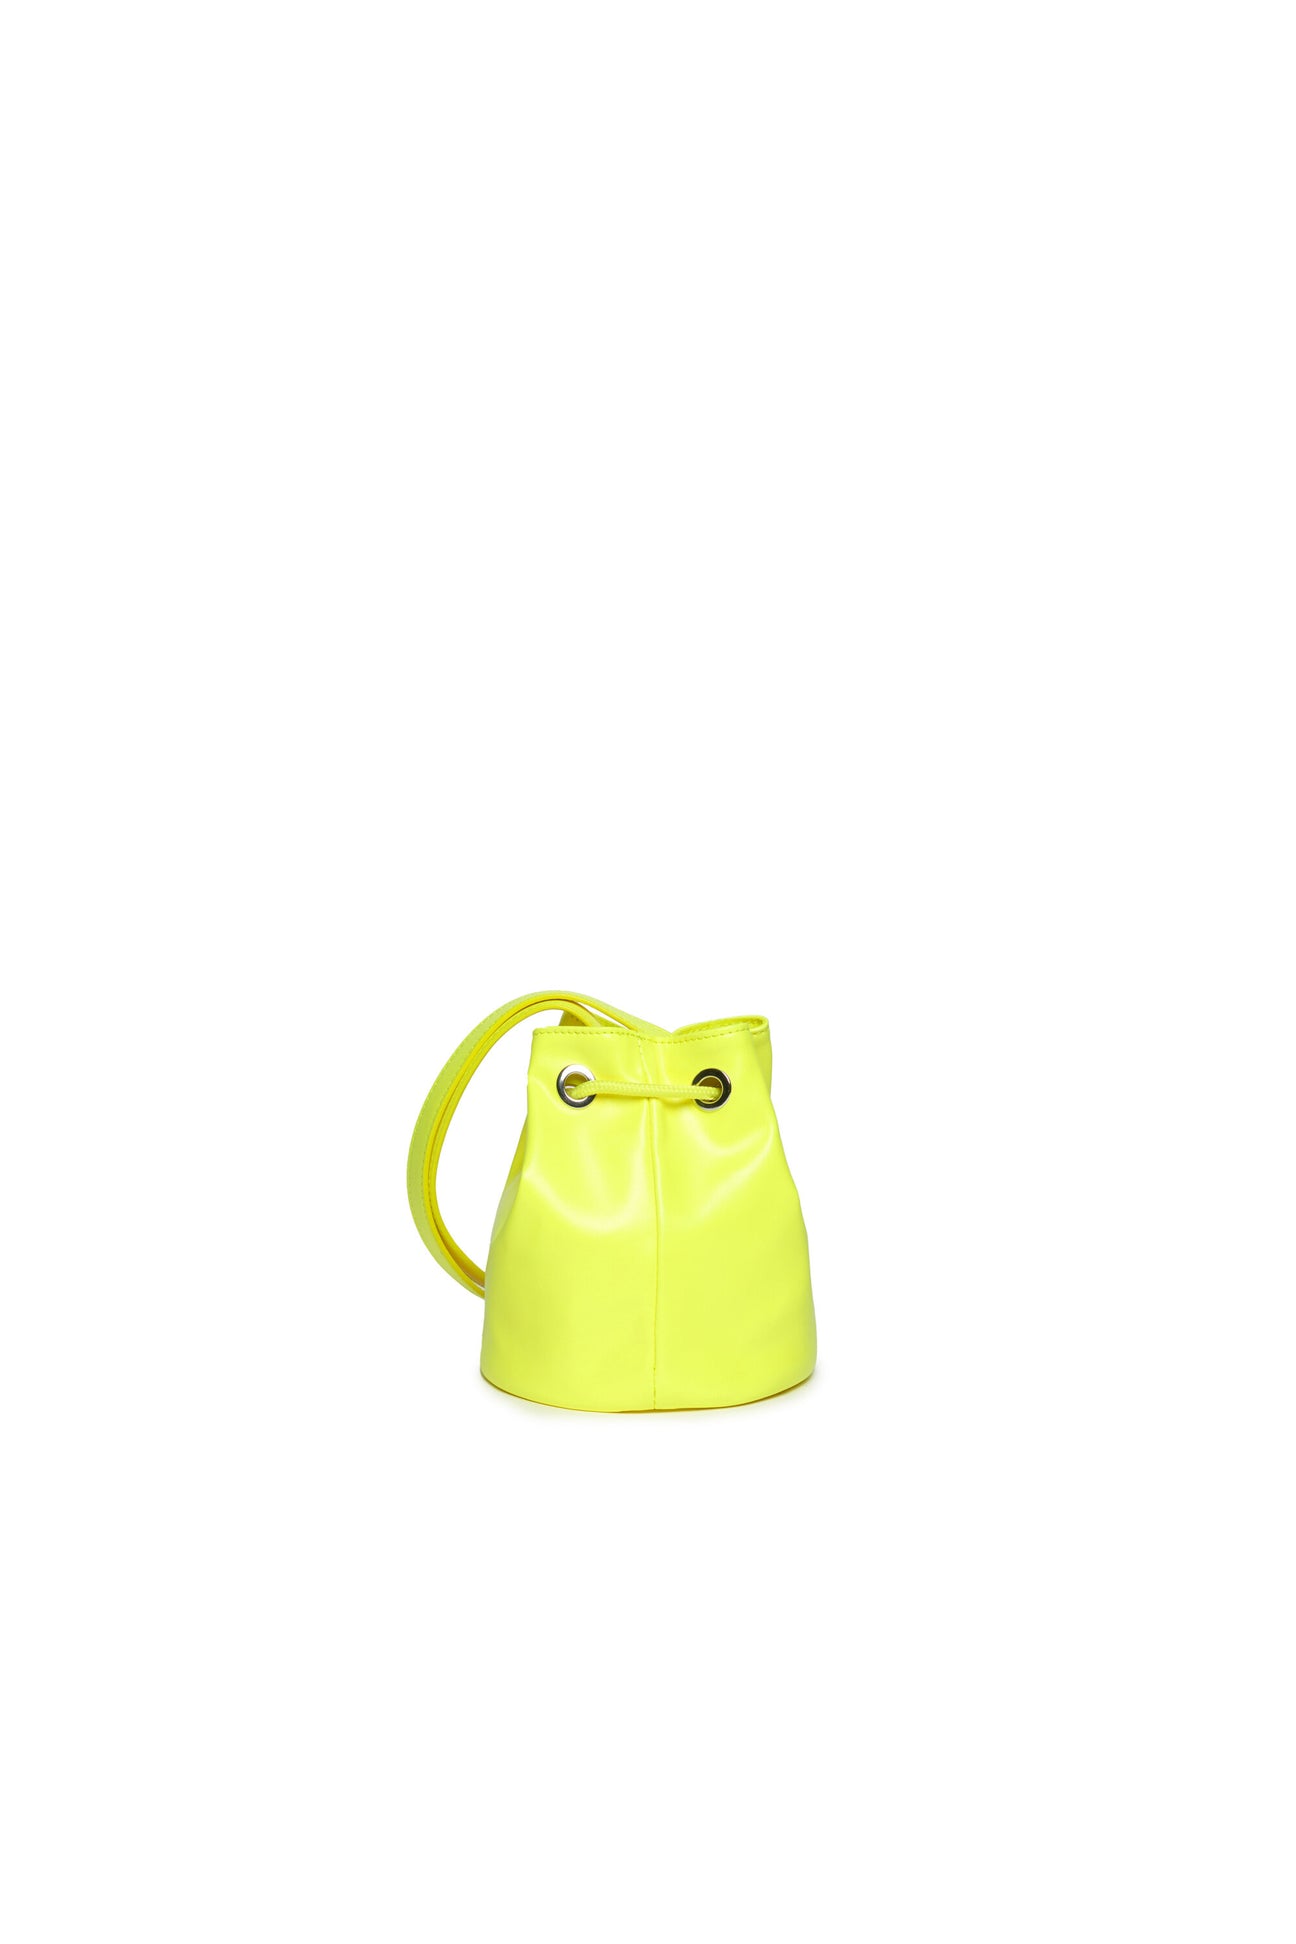 Wellty bag in fluo imitation leather Wellty bag in fluo imitation leather